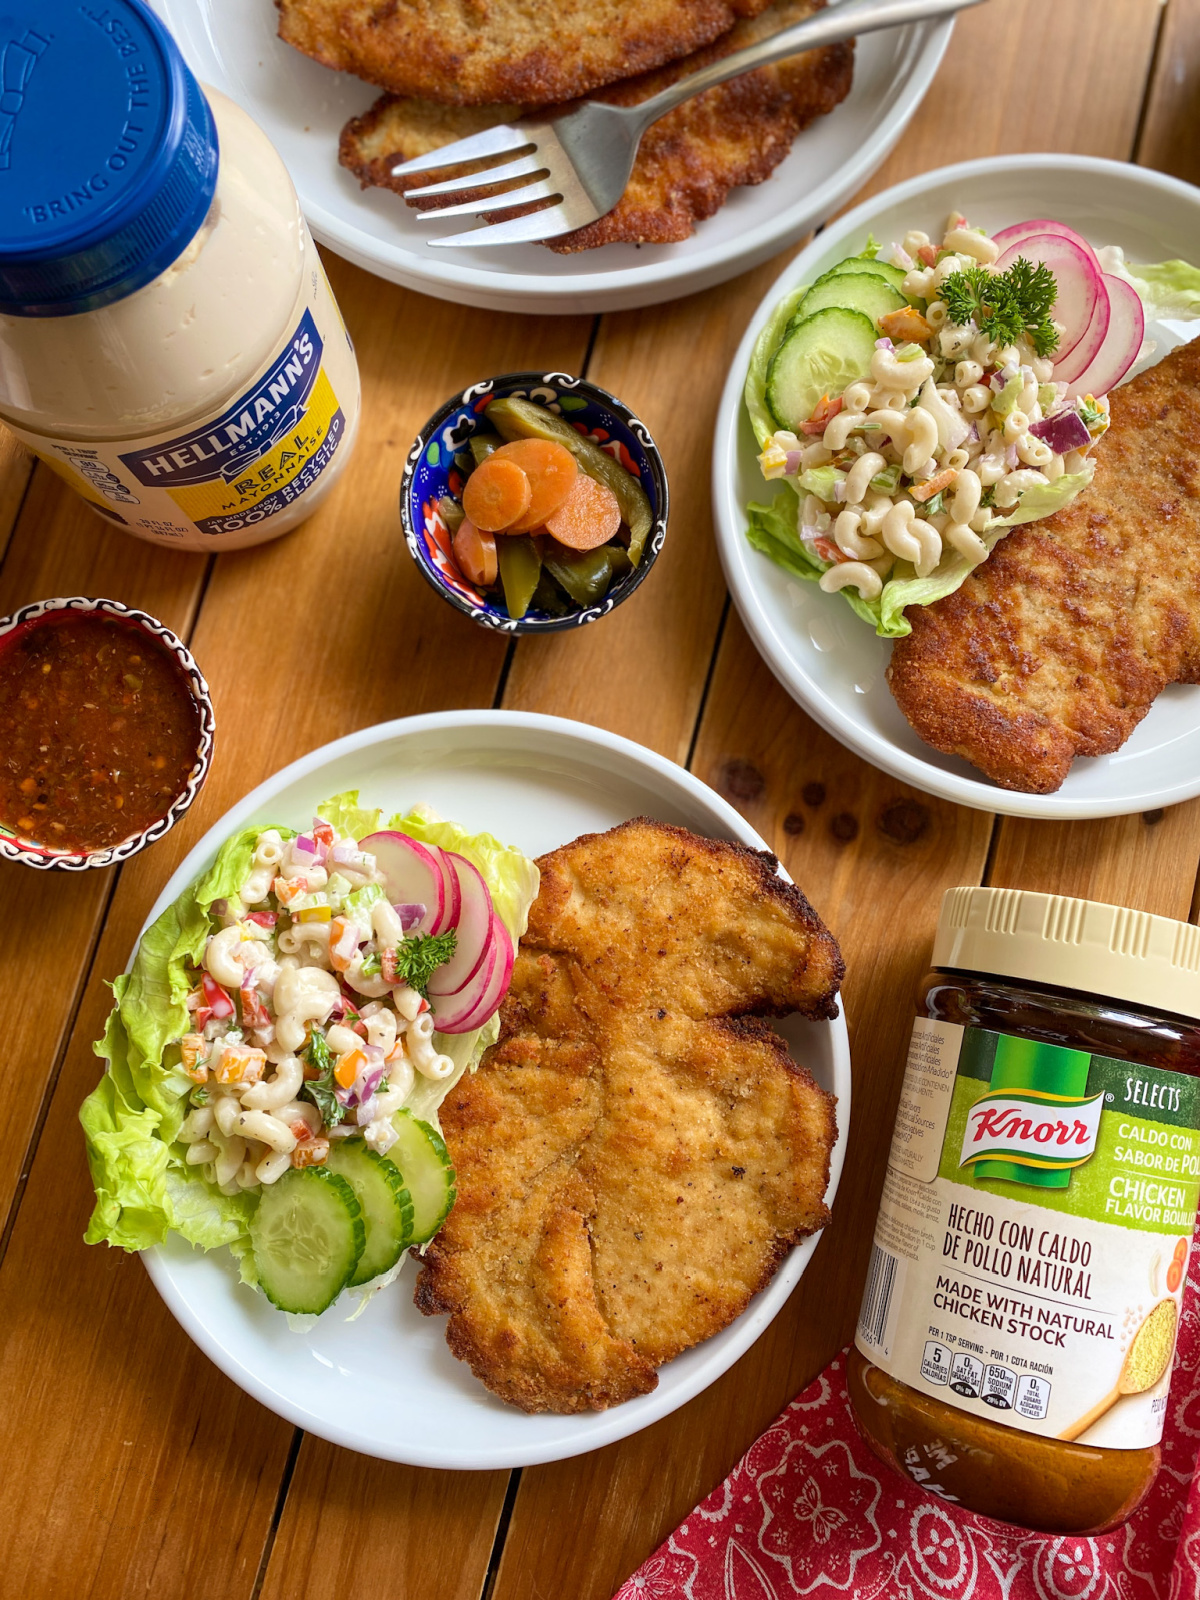 Homestyle menu for cinco de mayo celebrations includes milanesas and macaroni salad Mexican style